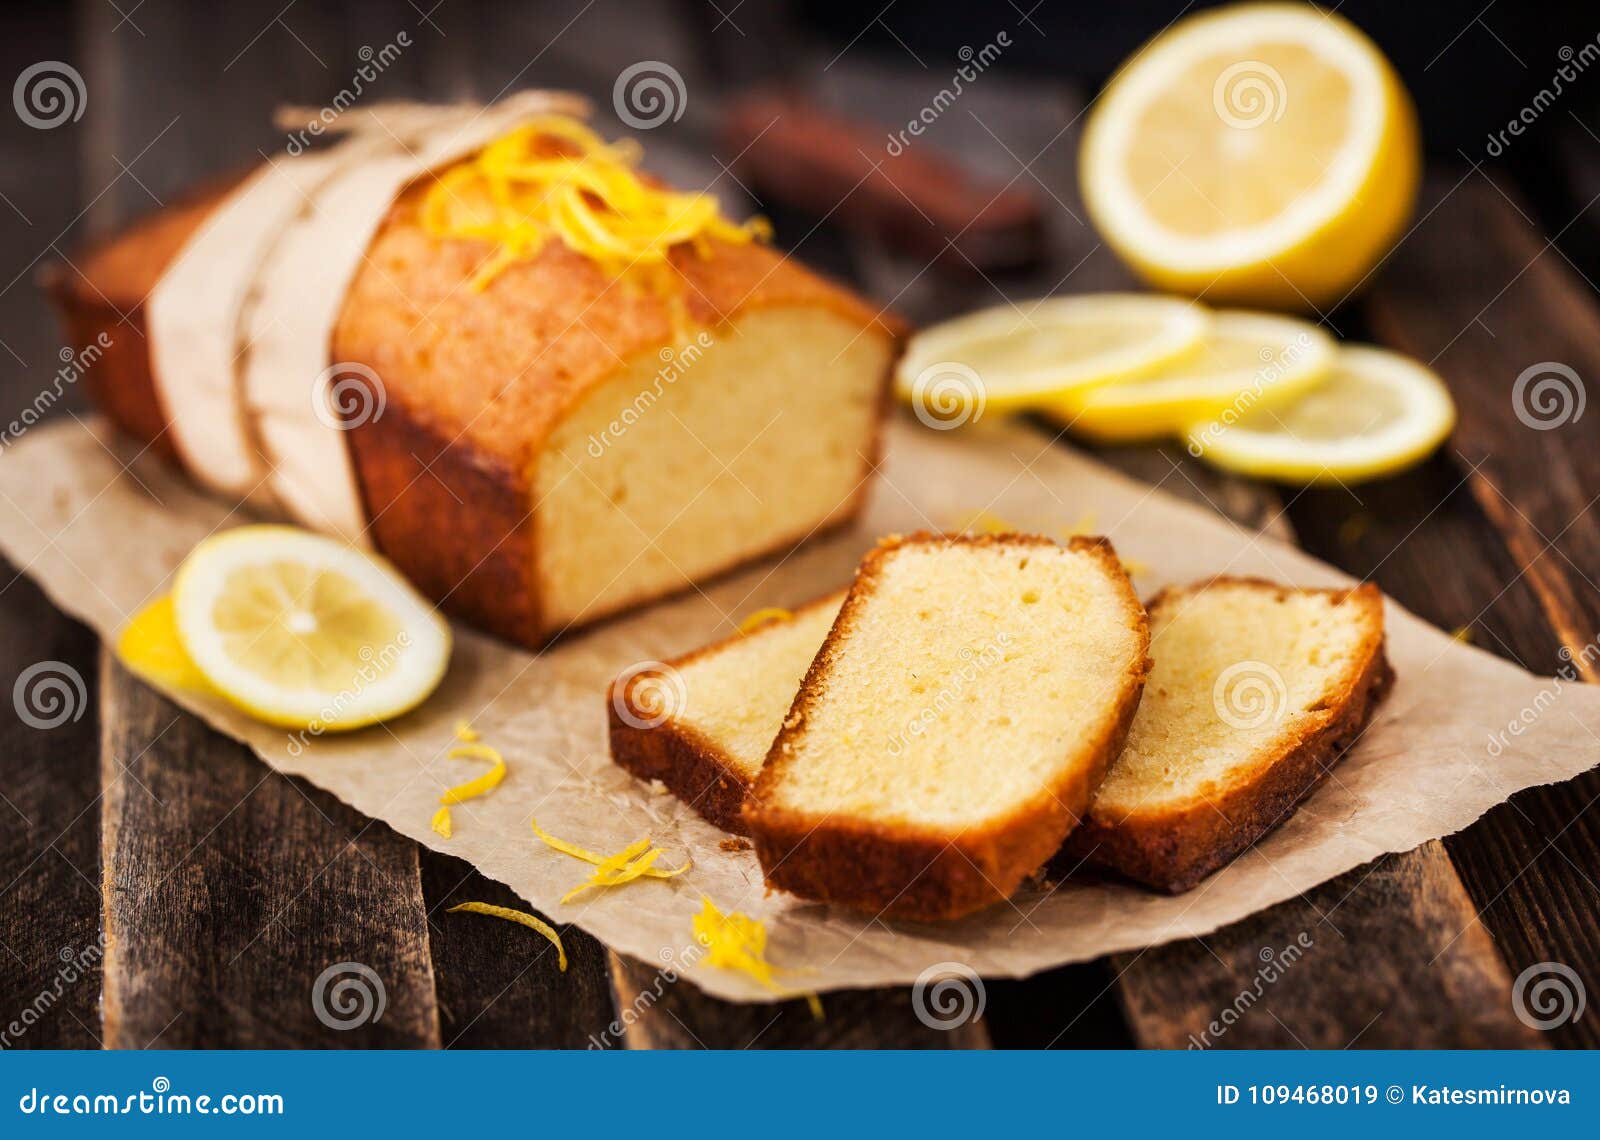 classic lemon pound cake on rustic wooden background